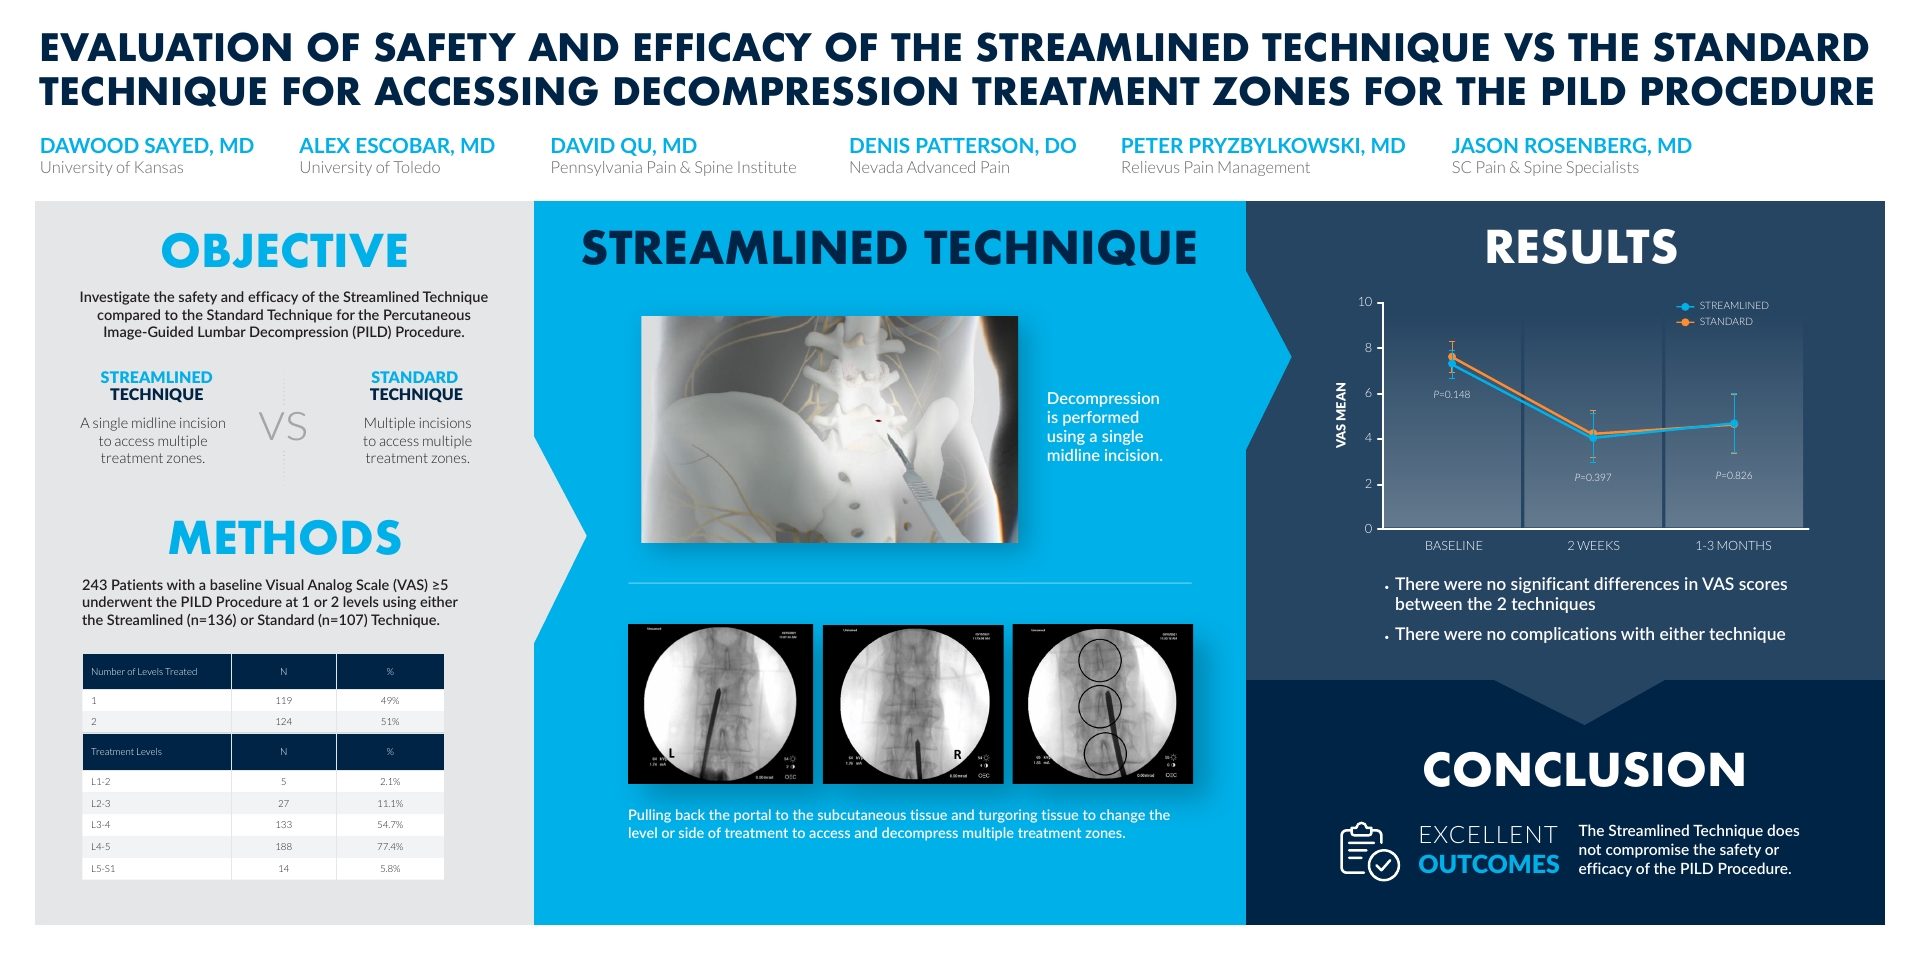 Infographic showing objective, methods and results of Evaluation of Safety and Efficacy of the Streamlined Technique vs the Standard Technique